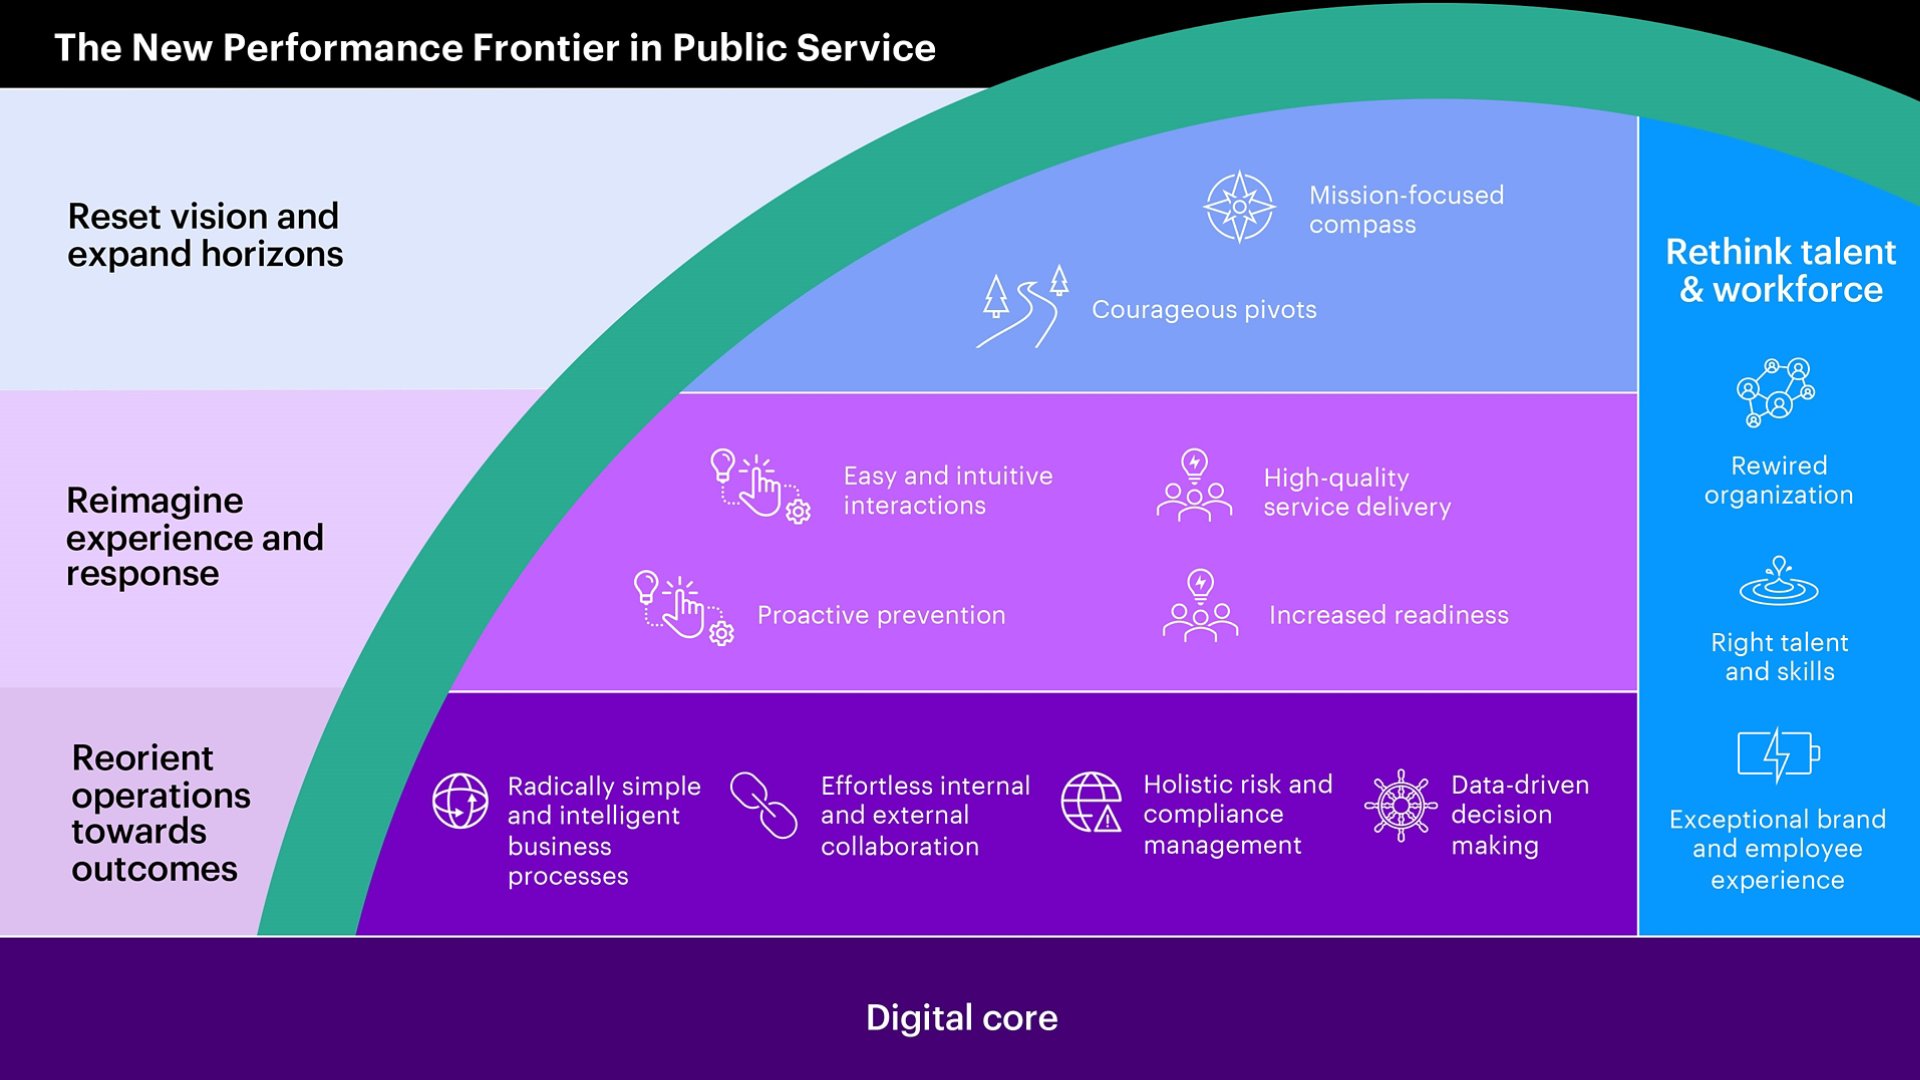 The New Performance Frontier in Public Service